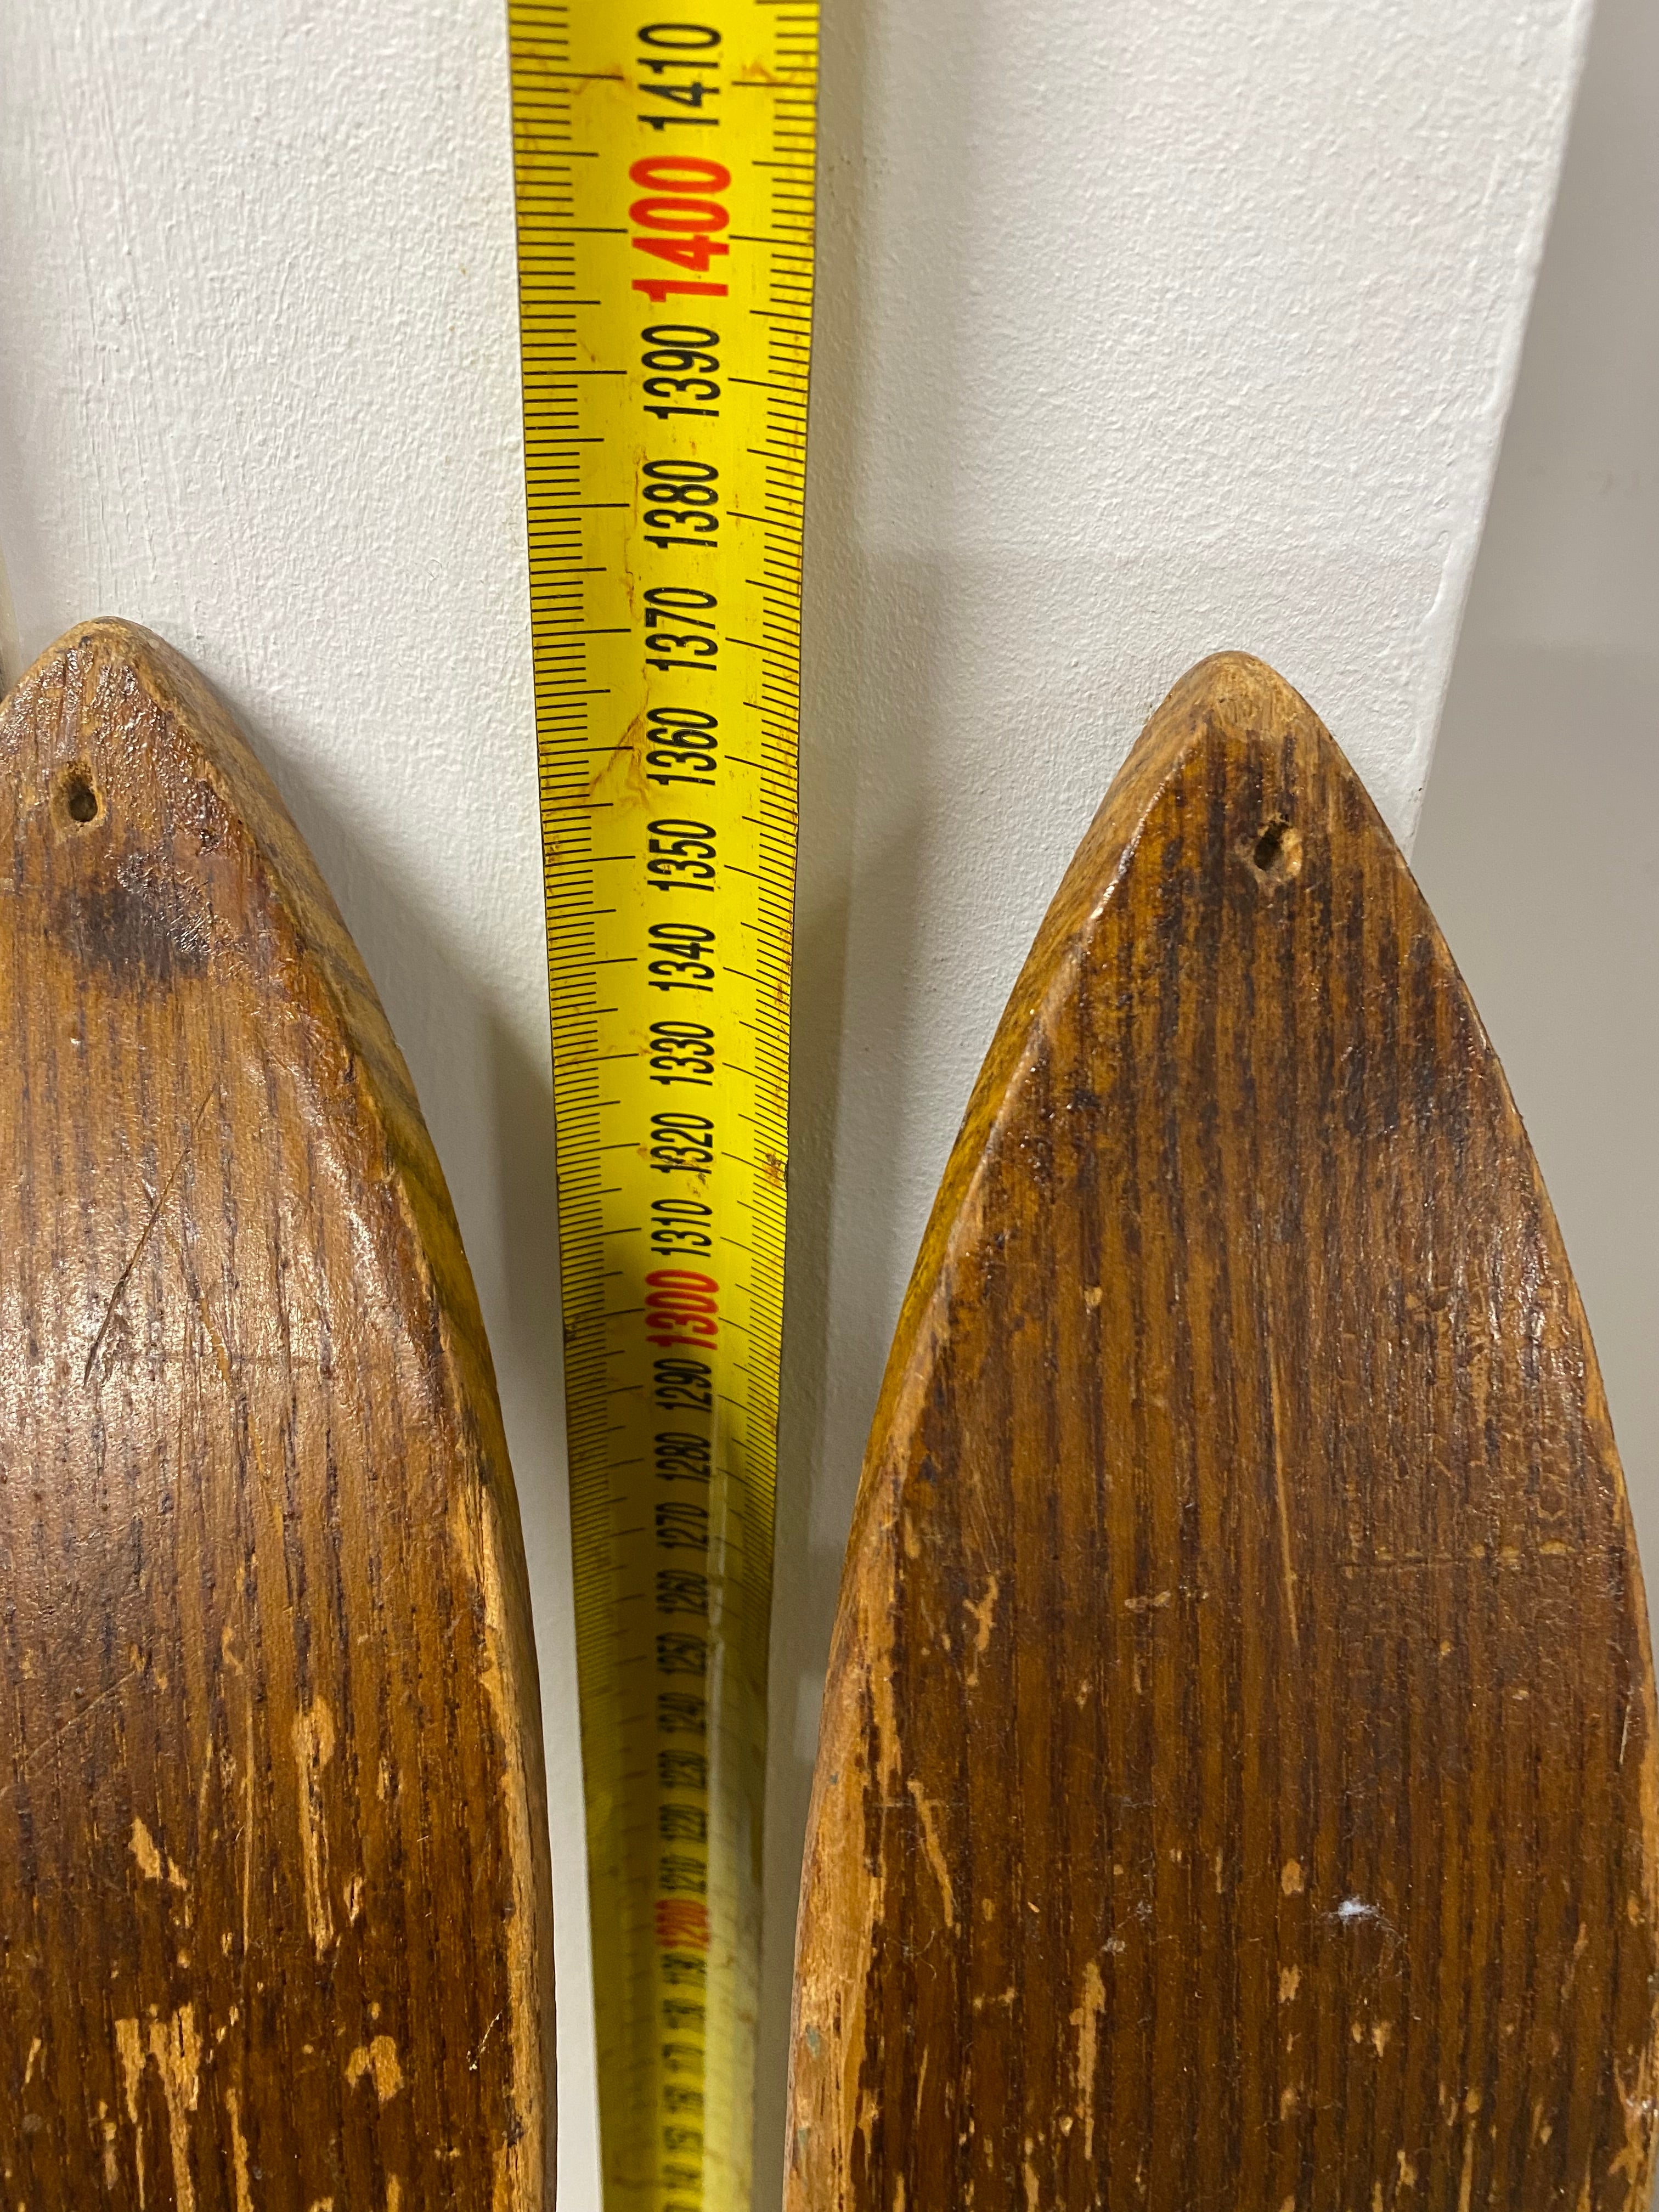 View of ski tip bases. Unbranded vintage wooden ski tips with small drilled holes in tips. leaning against white painted wall with yellow measuring tape. 